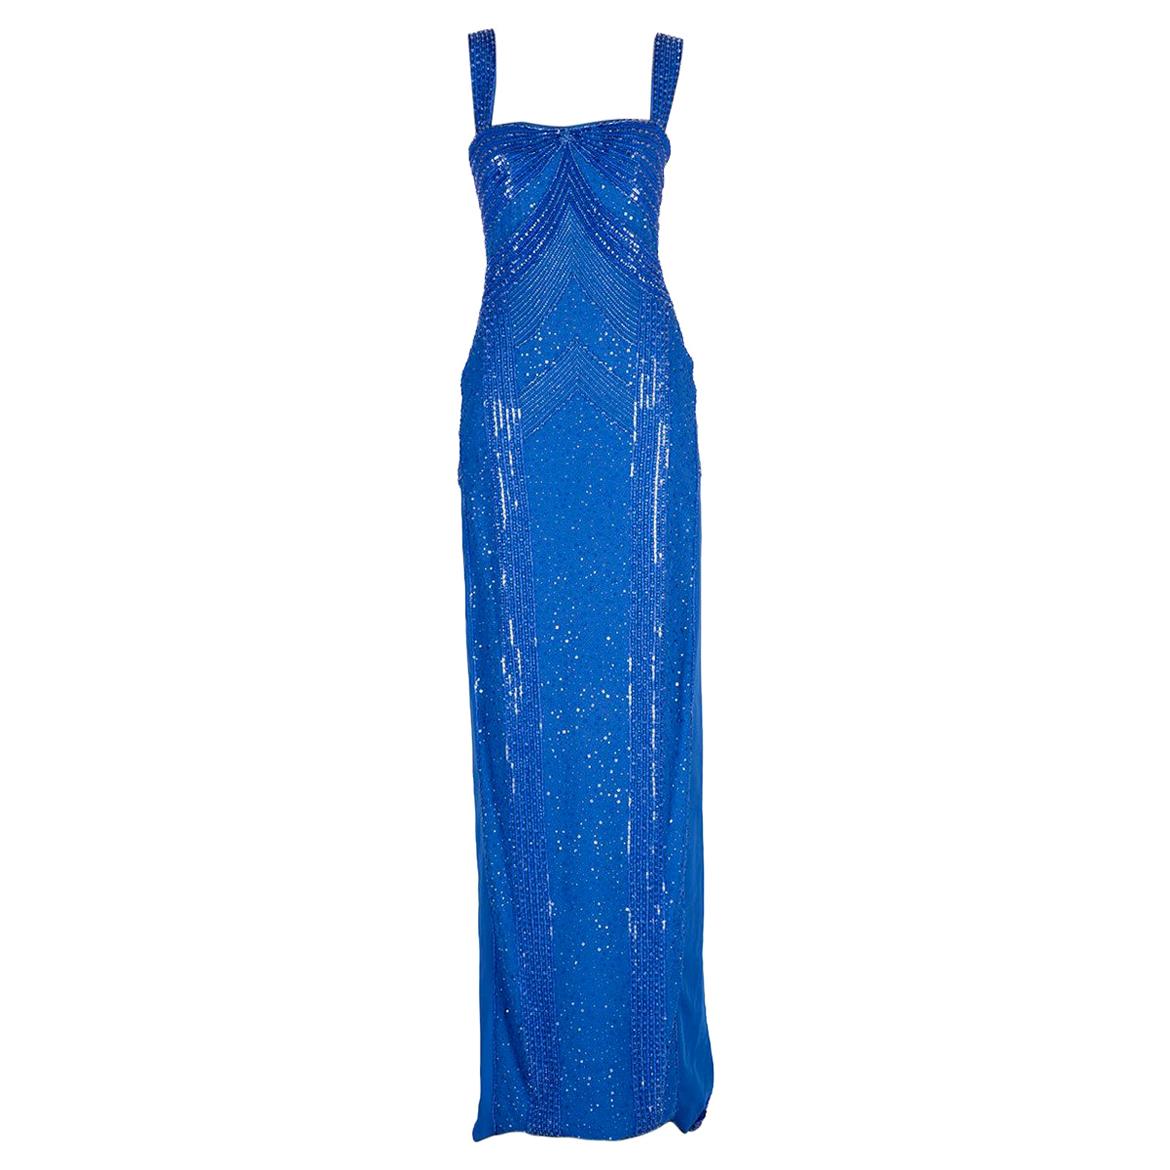 $12, 575 NEW VERSACE EMBELLISHED BLUE Gown 44 - 8